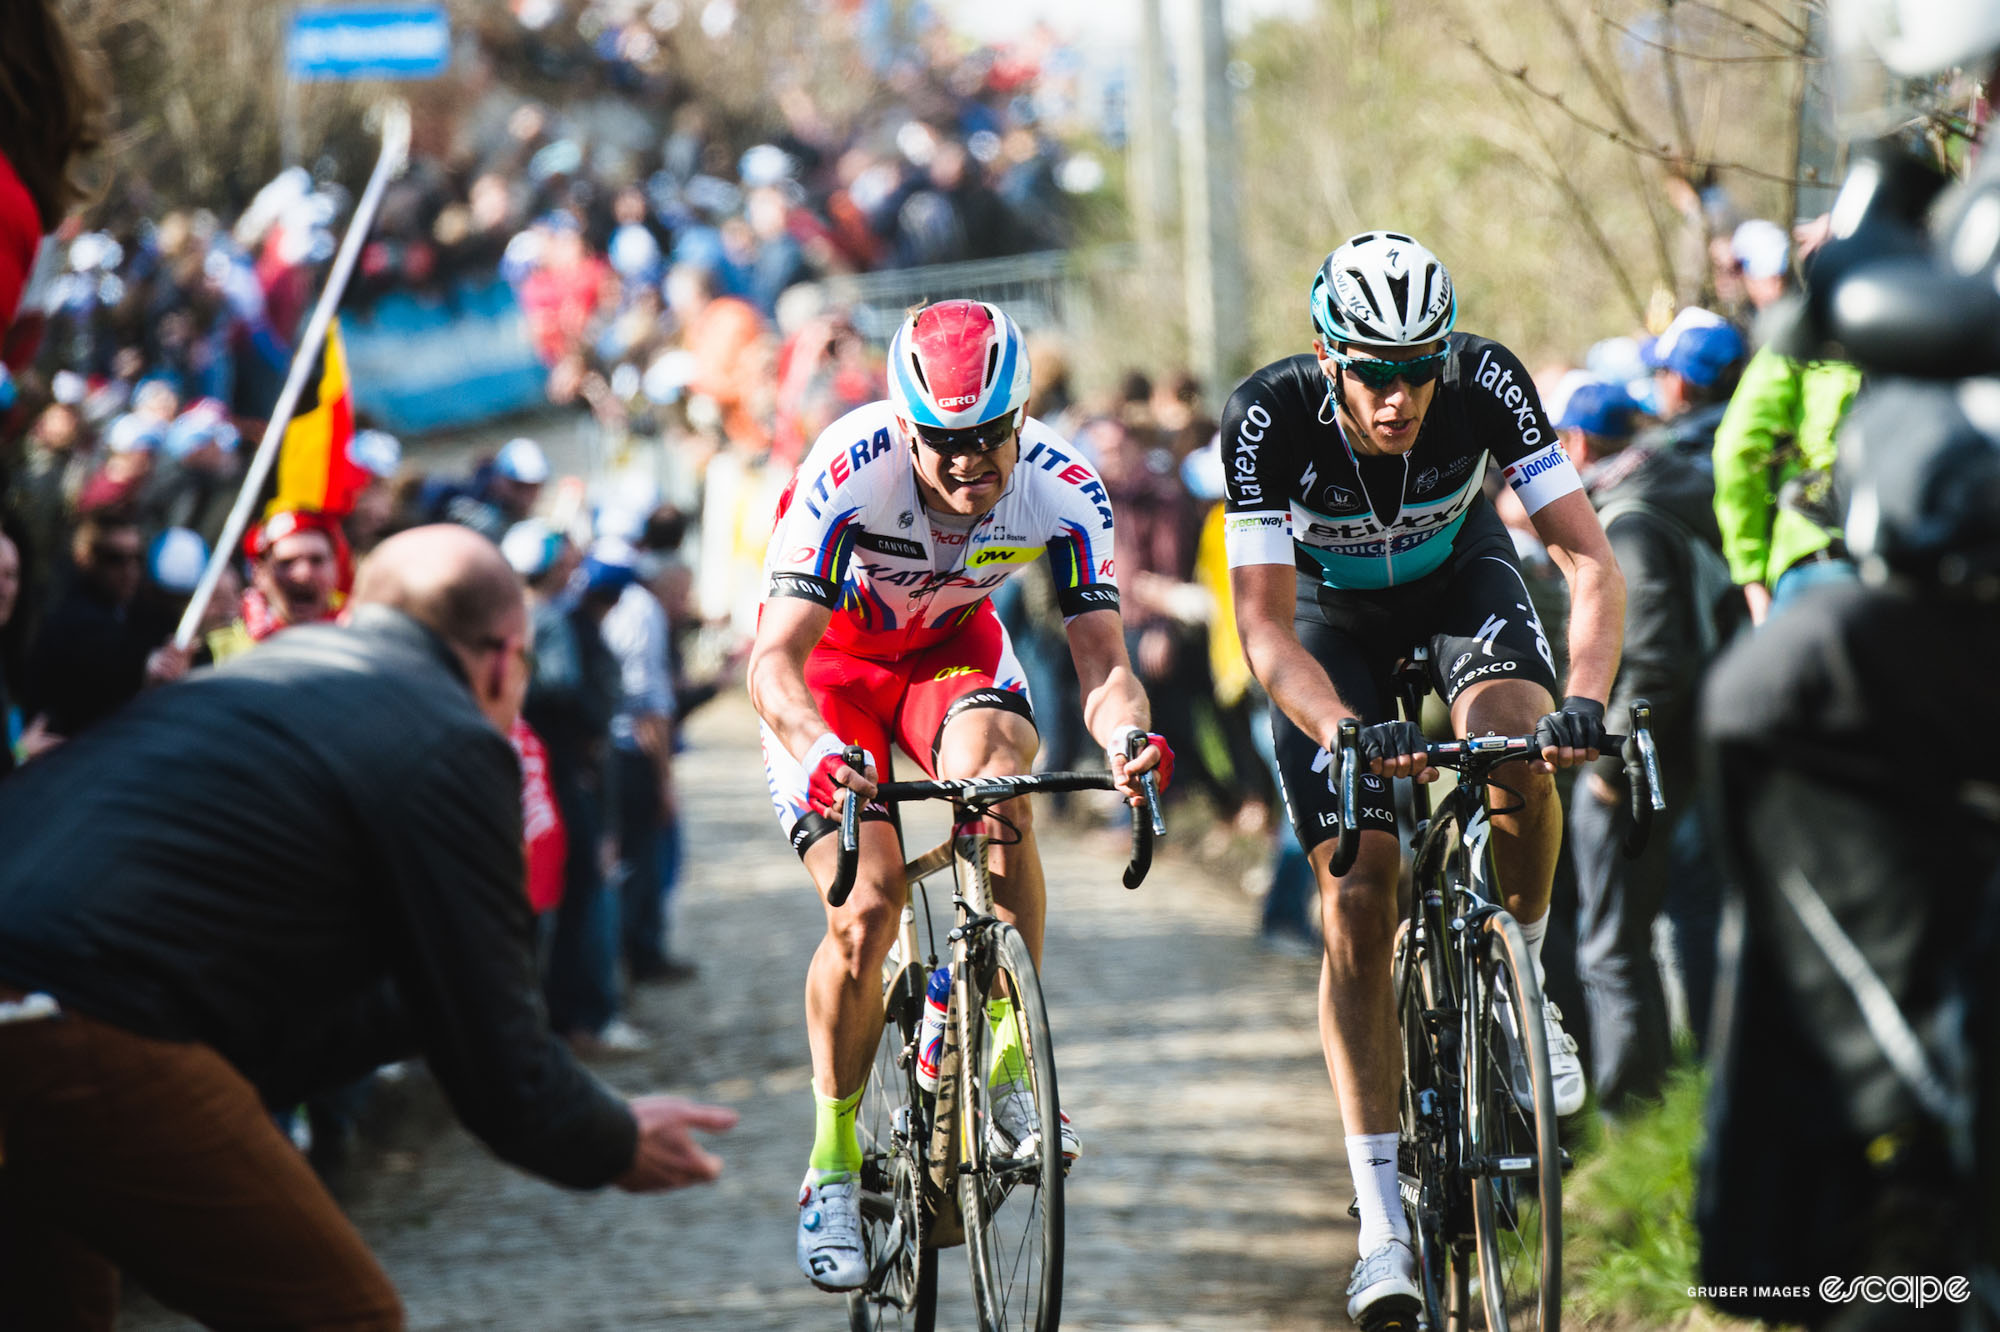 Alexander Kristoff and Niki Terpstra ride on cobbles at the Tour of Flanders in 2015. Terpstra leads, looking smooth and almost impassive, while Kristoff is grimacing as he holds the wheel.